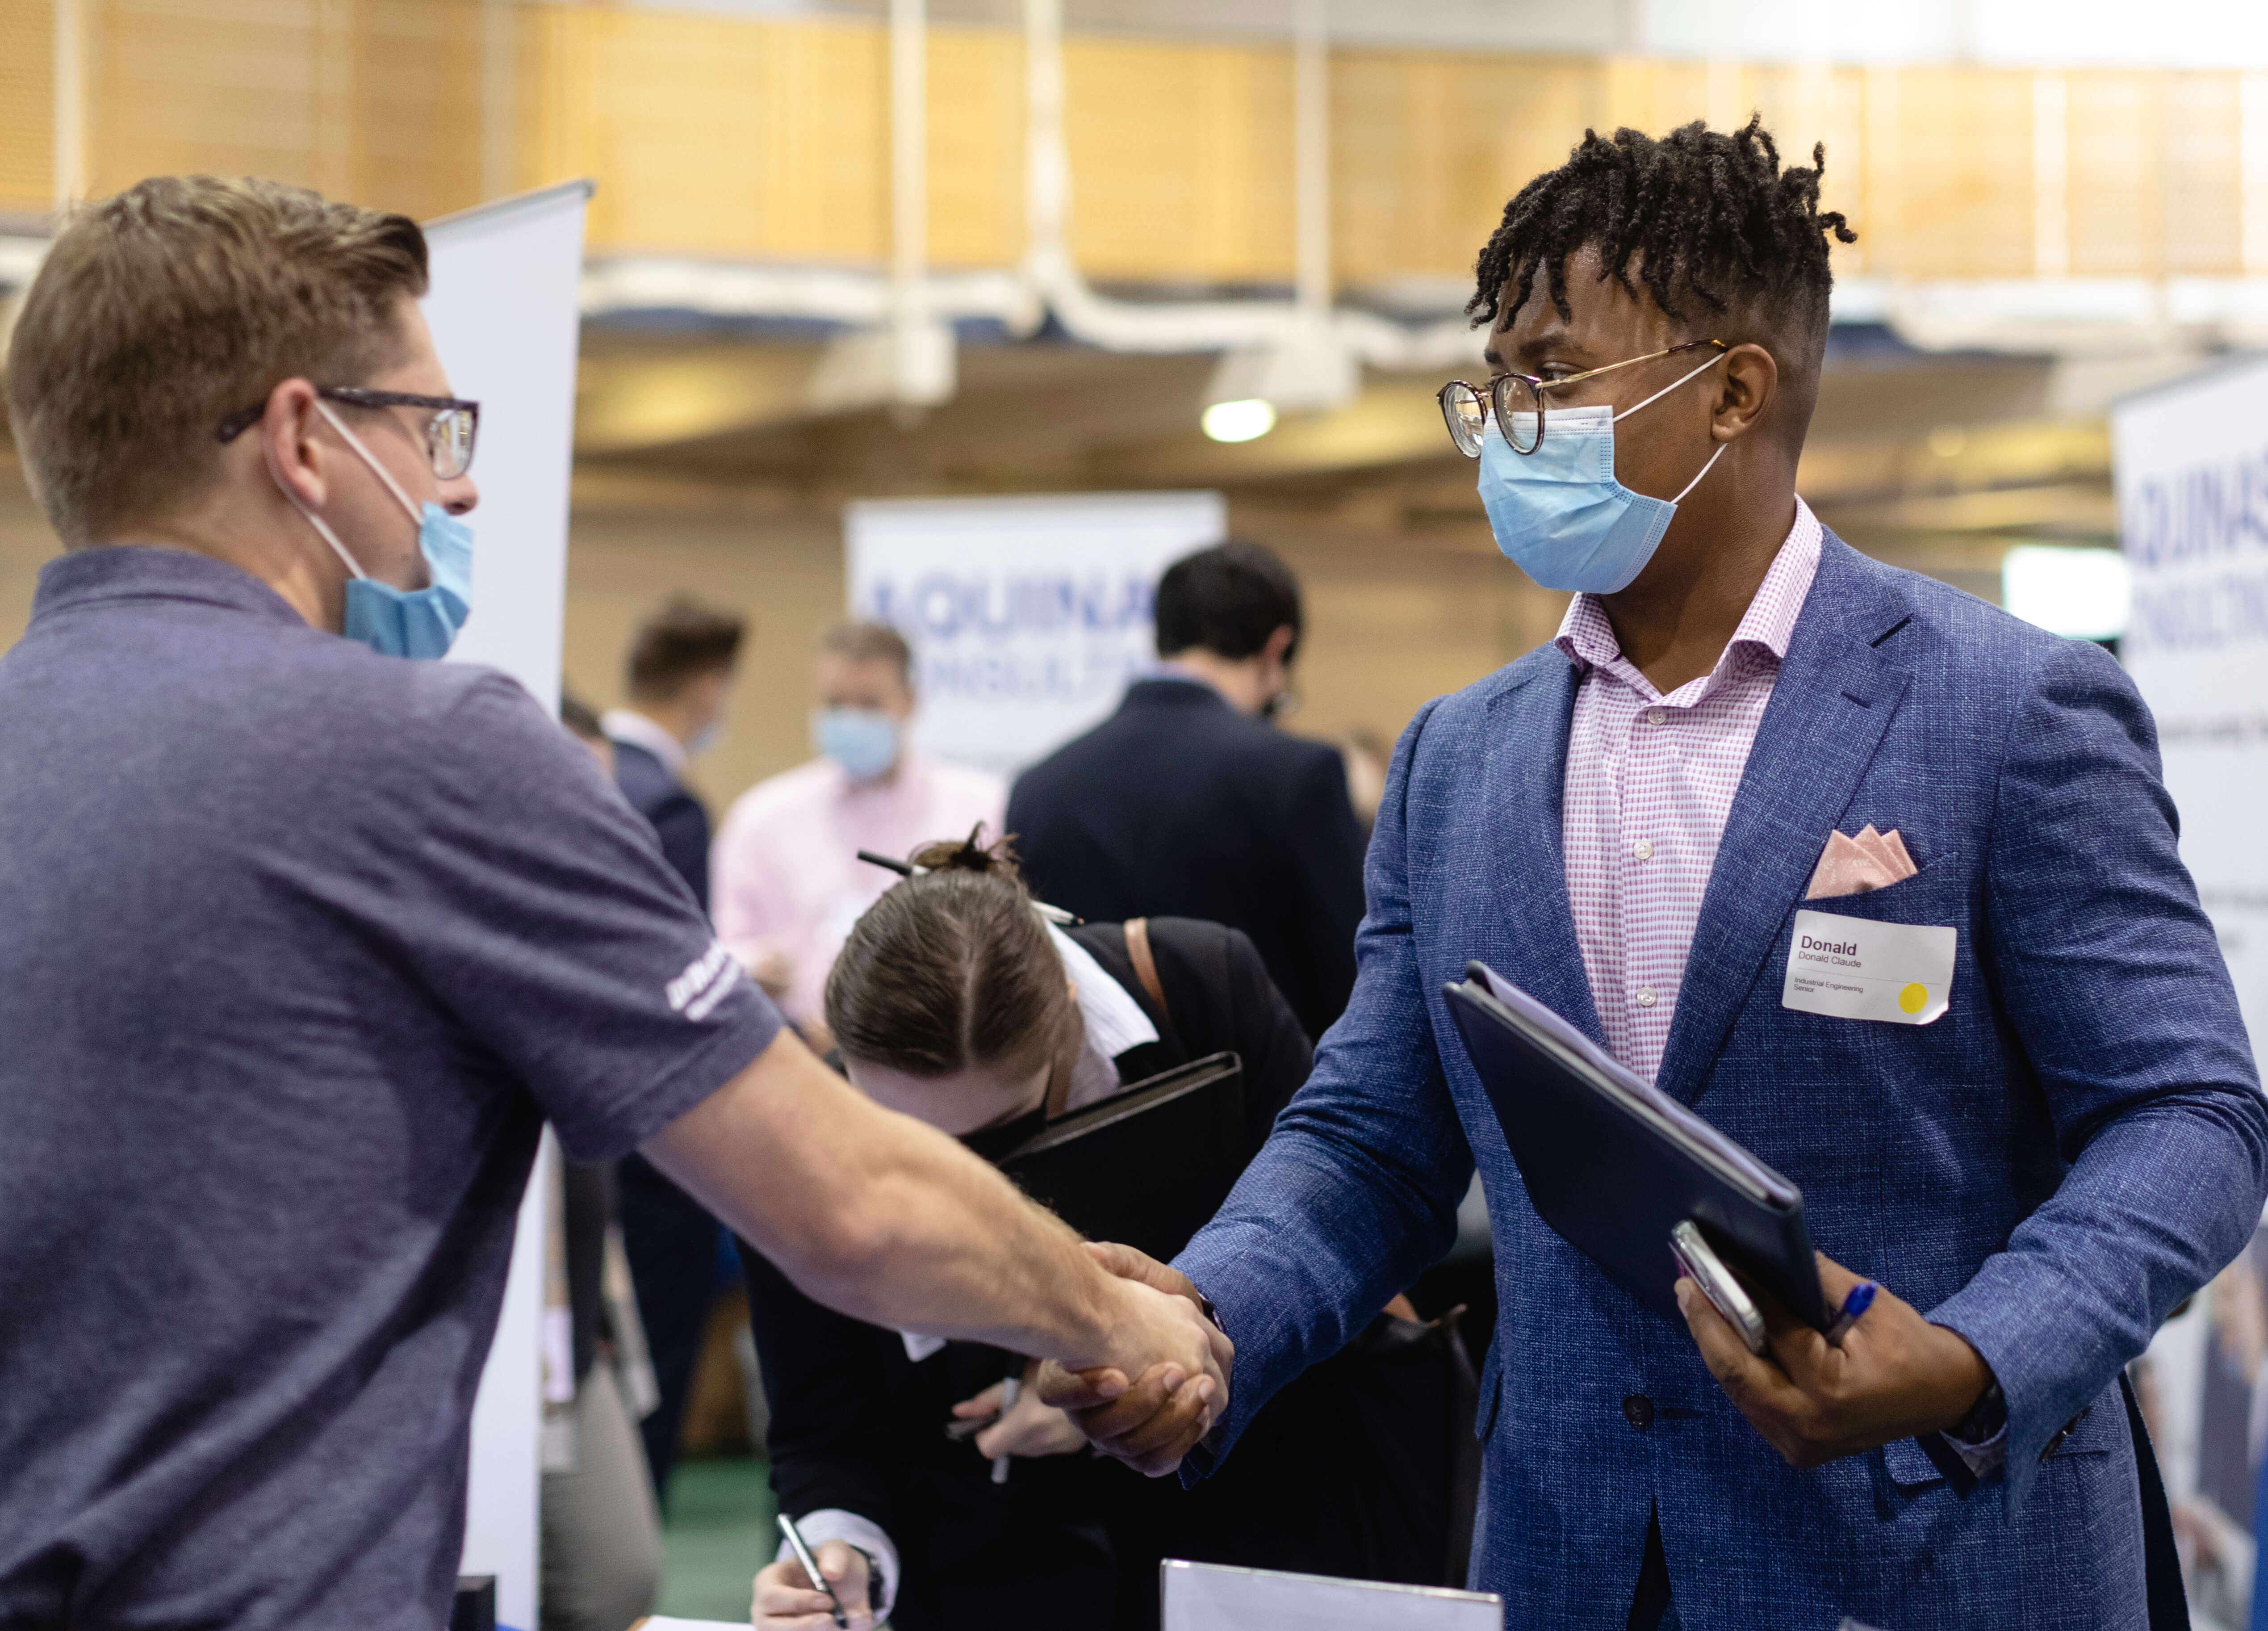 Two people shake hands at the career fair